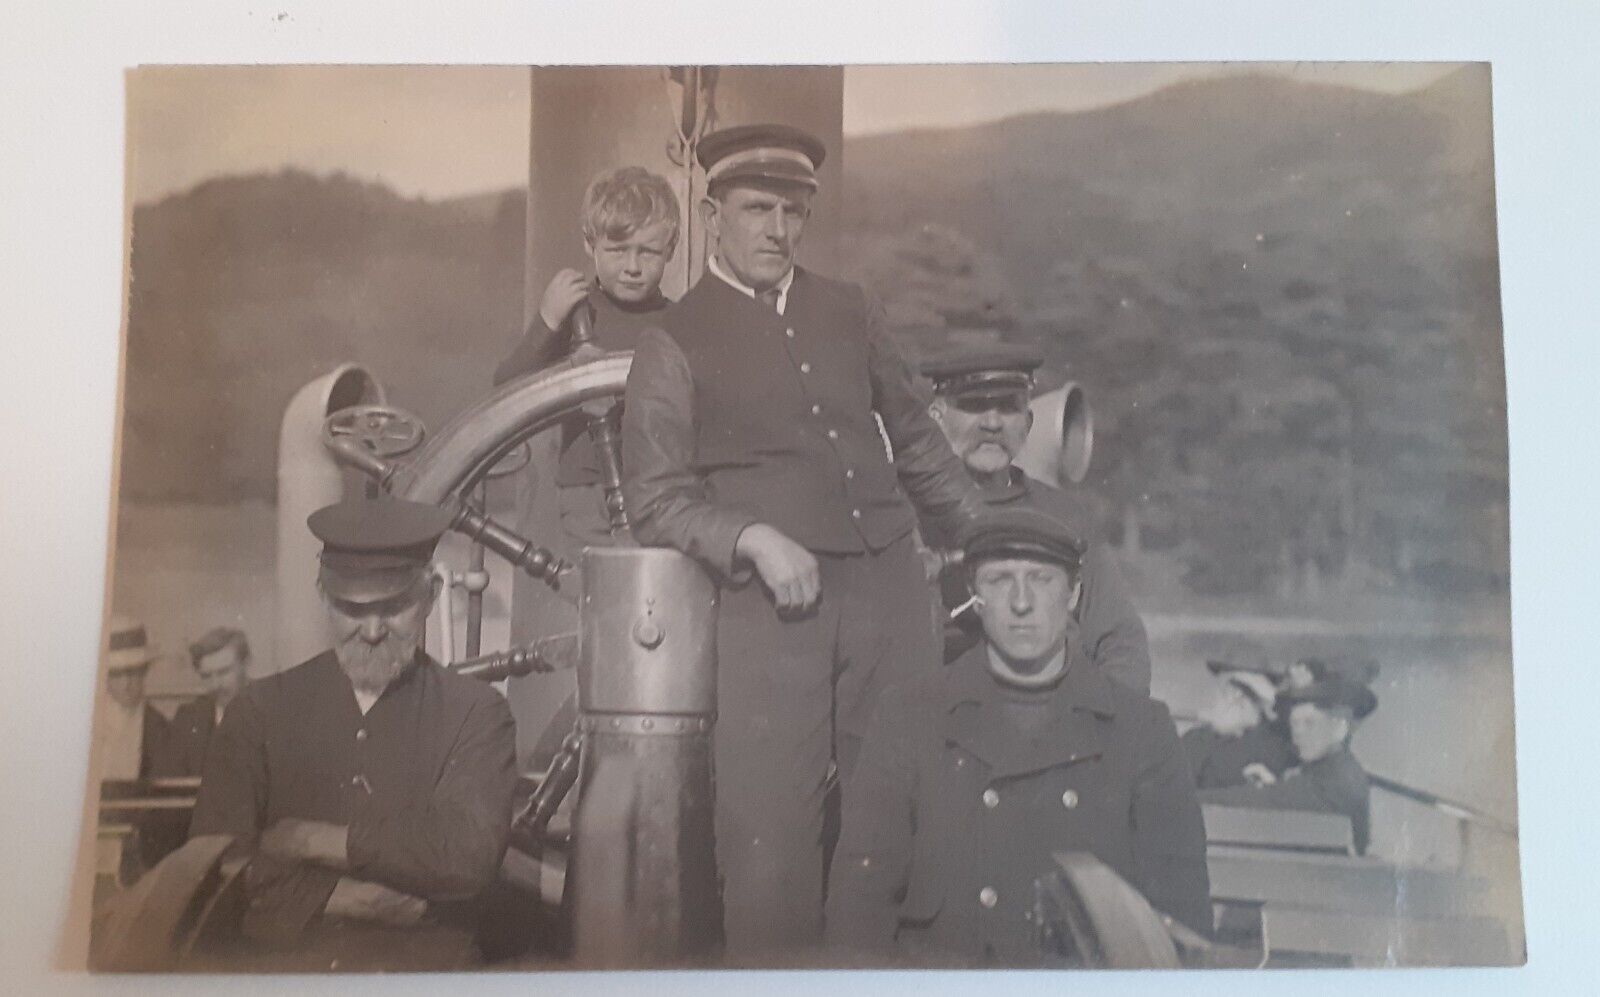 House Clearance - WW1 PERIOD PHOTO POSTCARD - BOAT CREW/BOY - POS LAKE DISTRICT - UNPOSTED